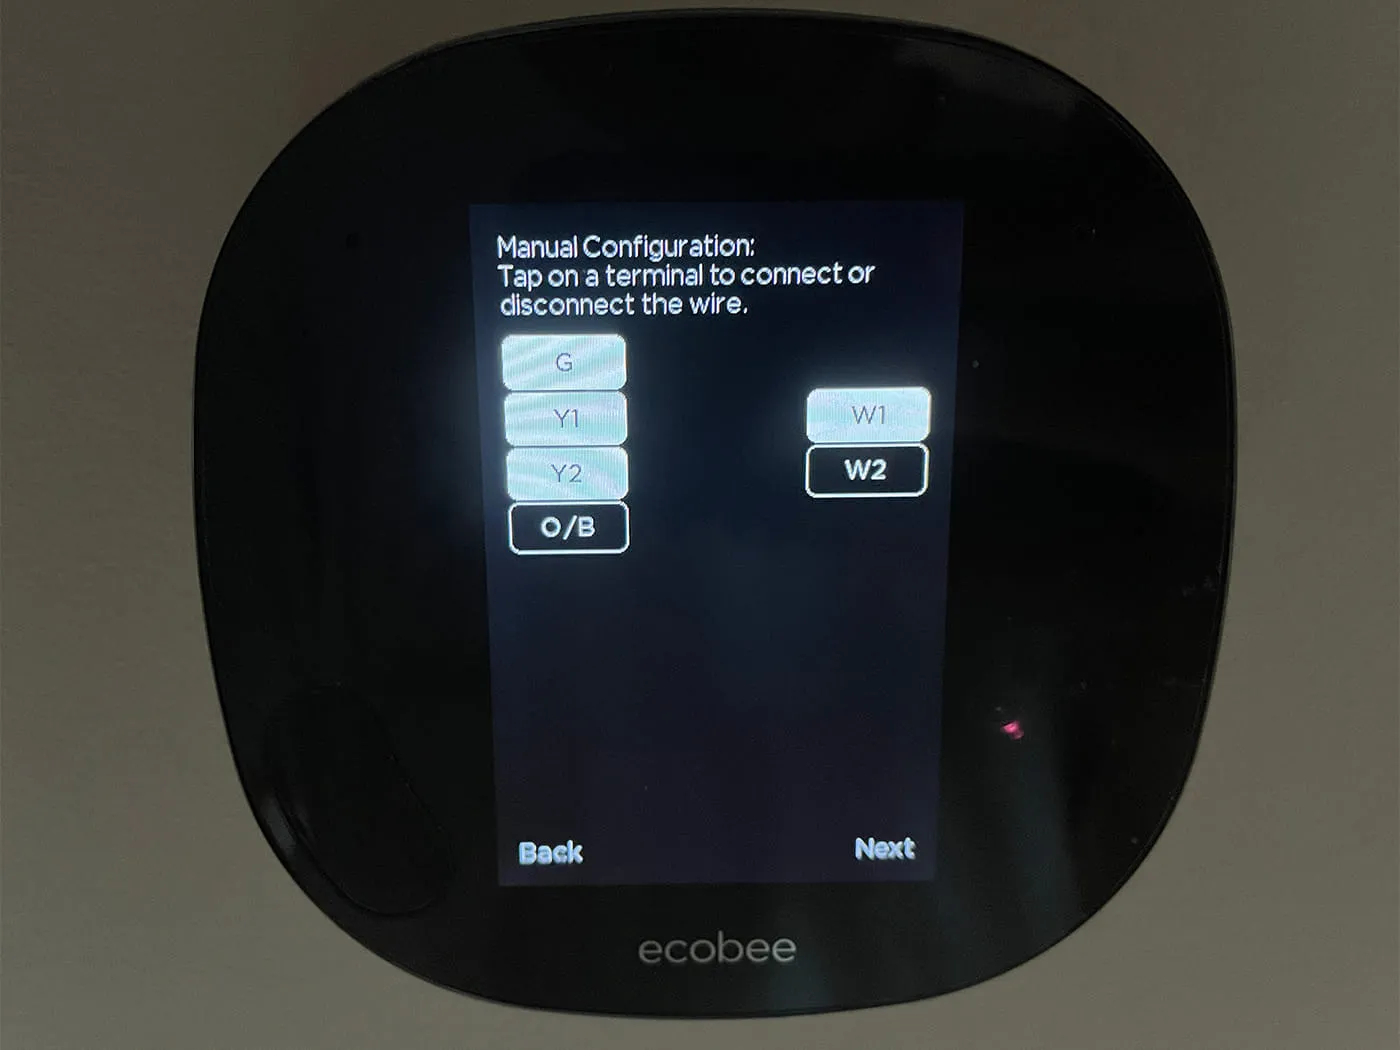 Ecobee thermostat Manual Wiring Configuration screen